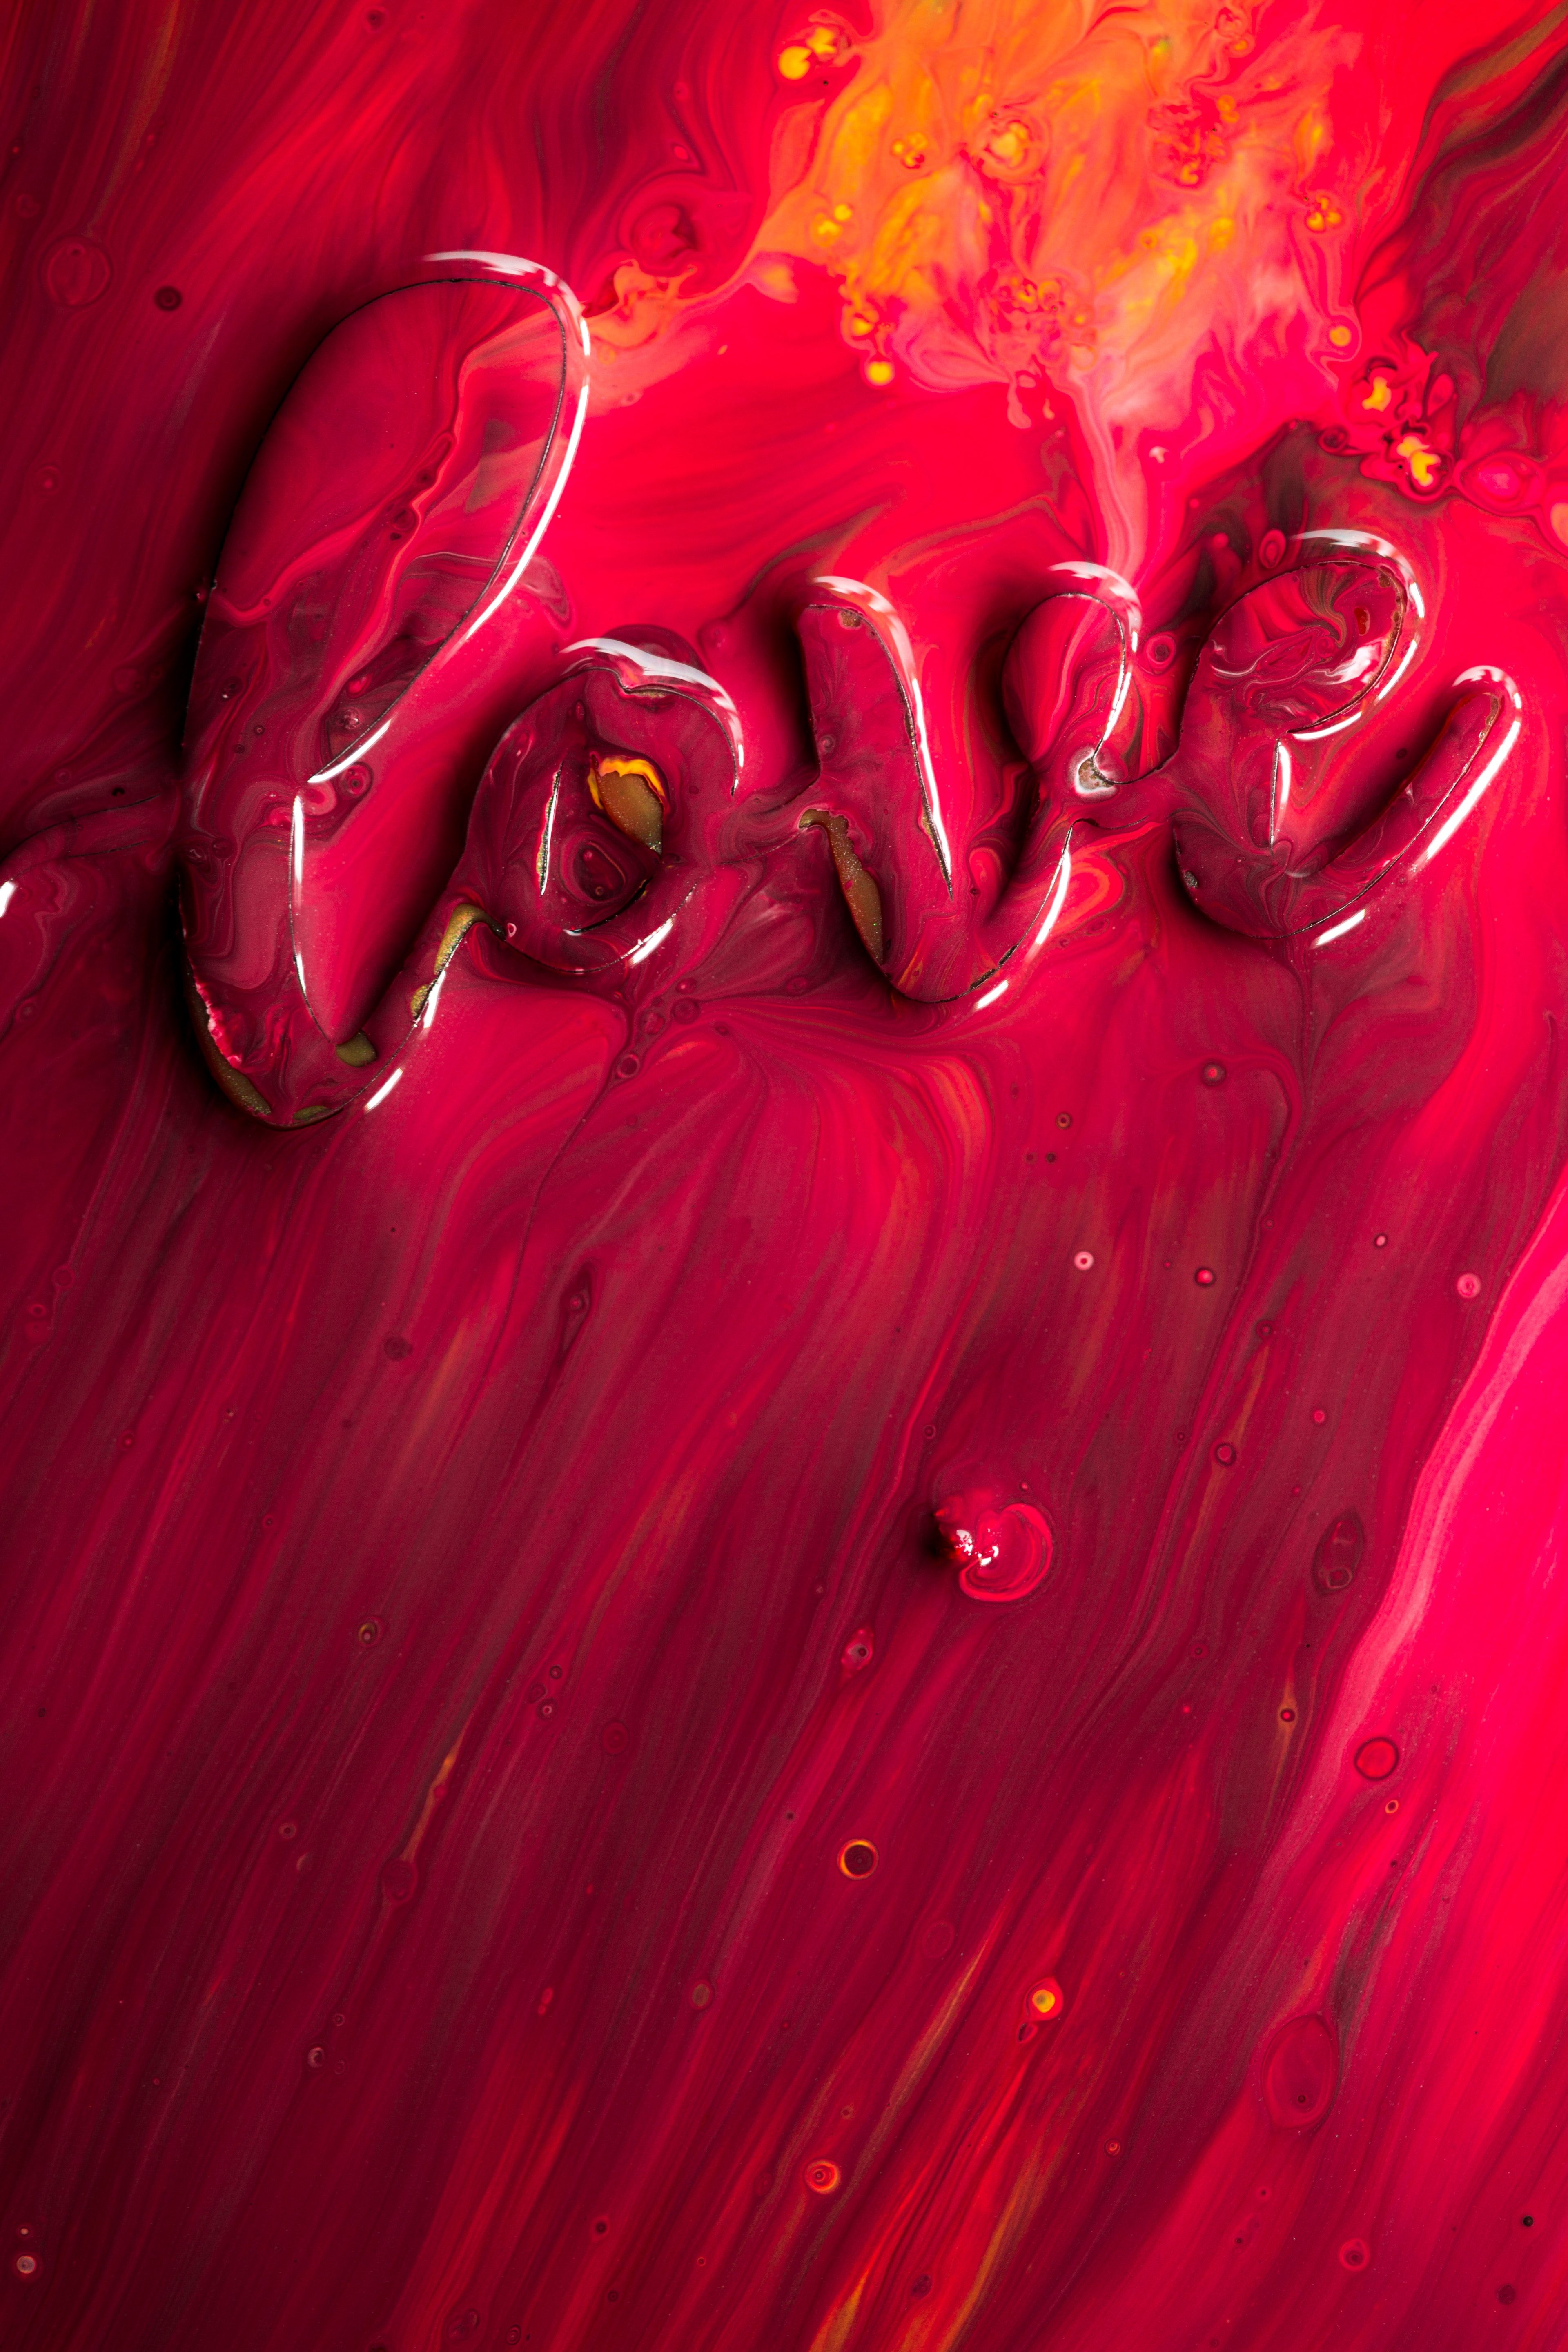 Love 4K Wallpaper, Food, Red, Creamy, text, Aesthetic, Love